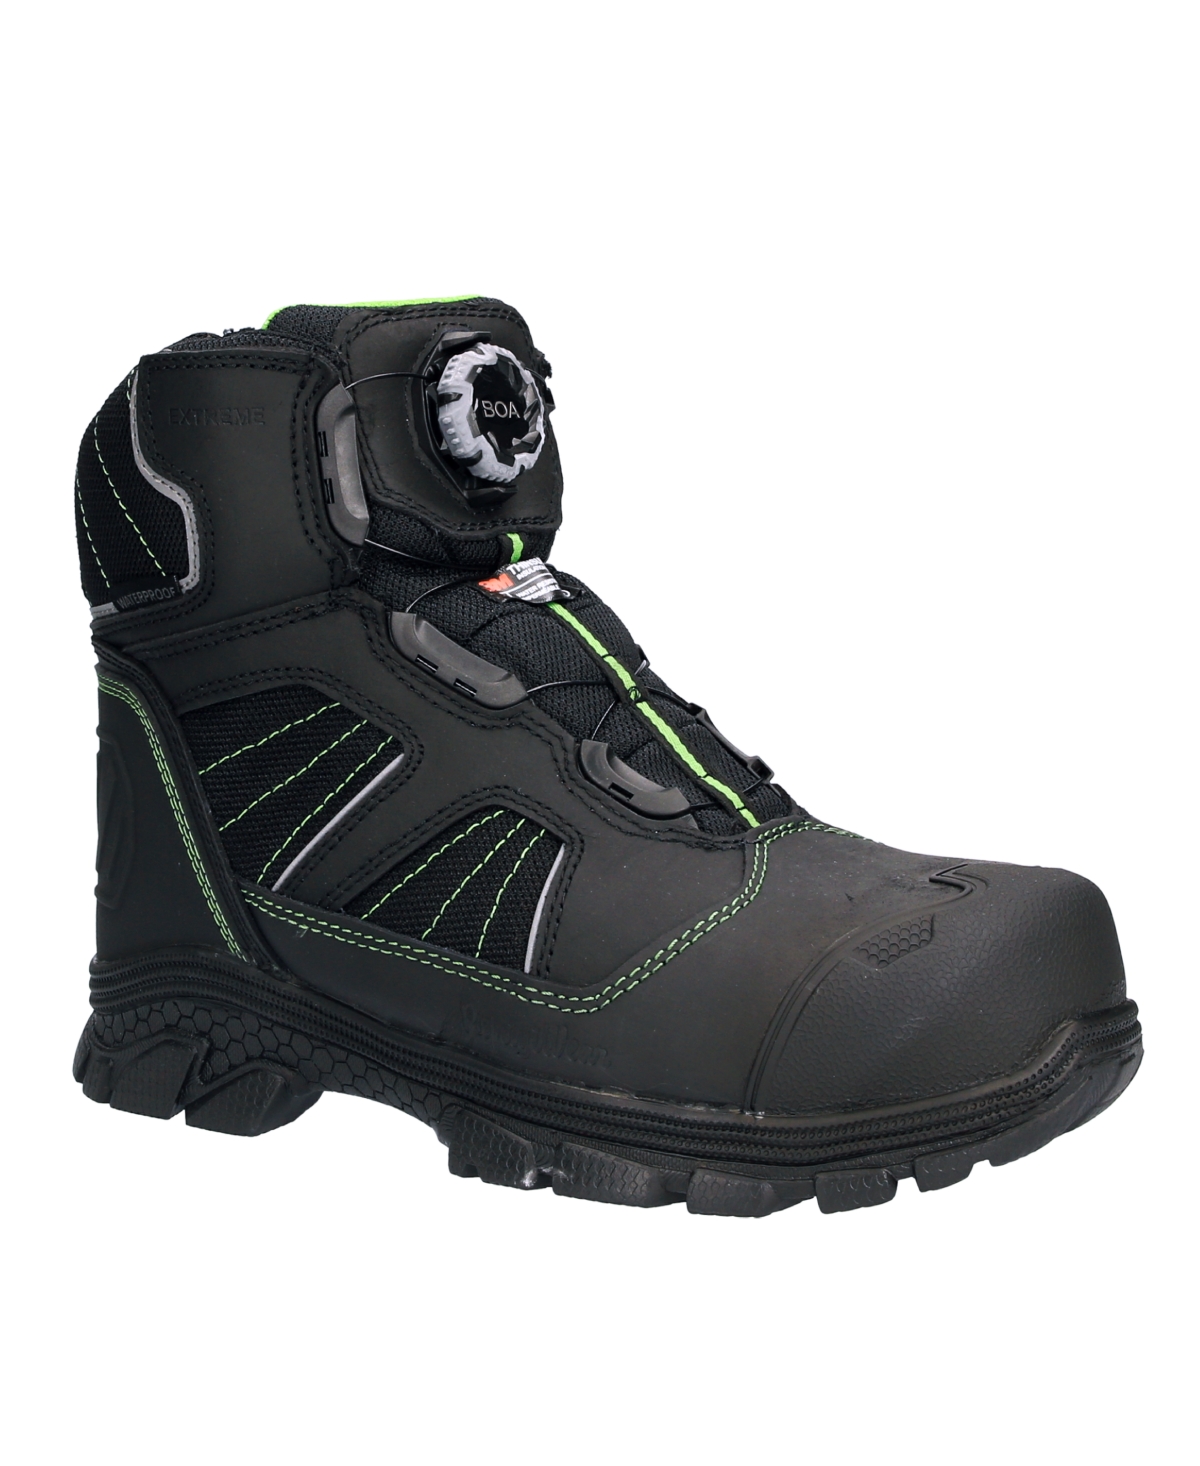 Men's Extreme Hiker Waterproof Insulated Freezer Boots with Boa Fit System - Black